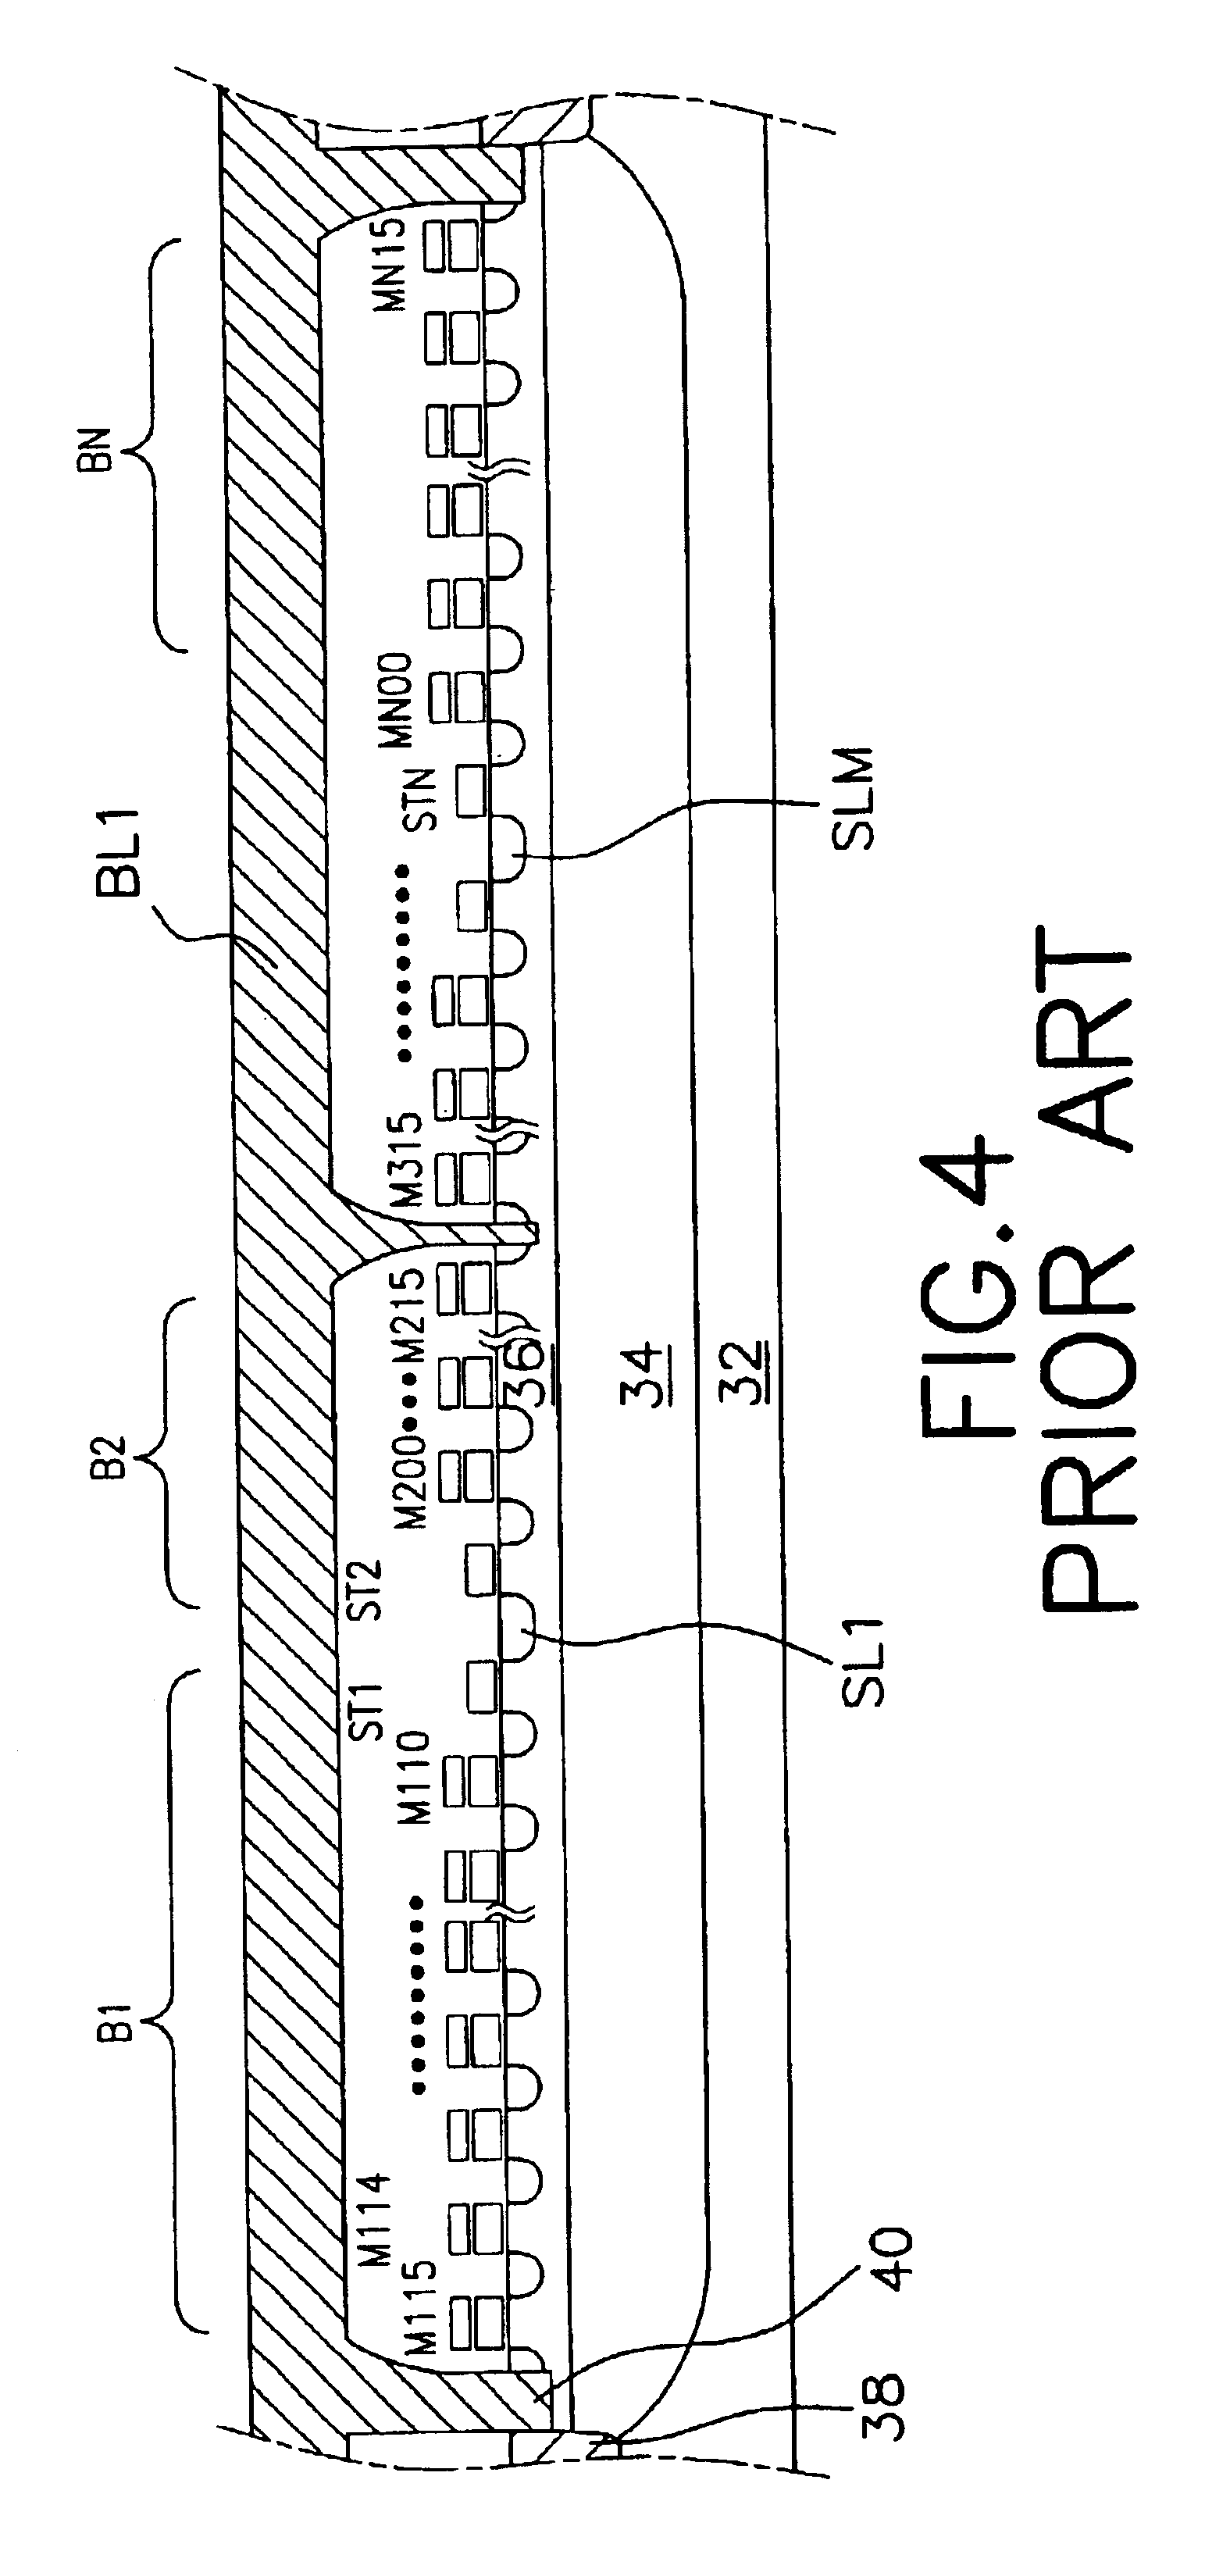 Method of programming and erasing a non-volatile semiconductor memory